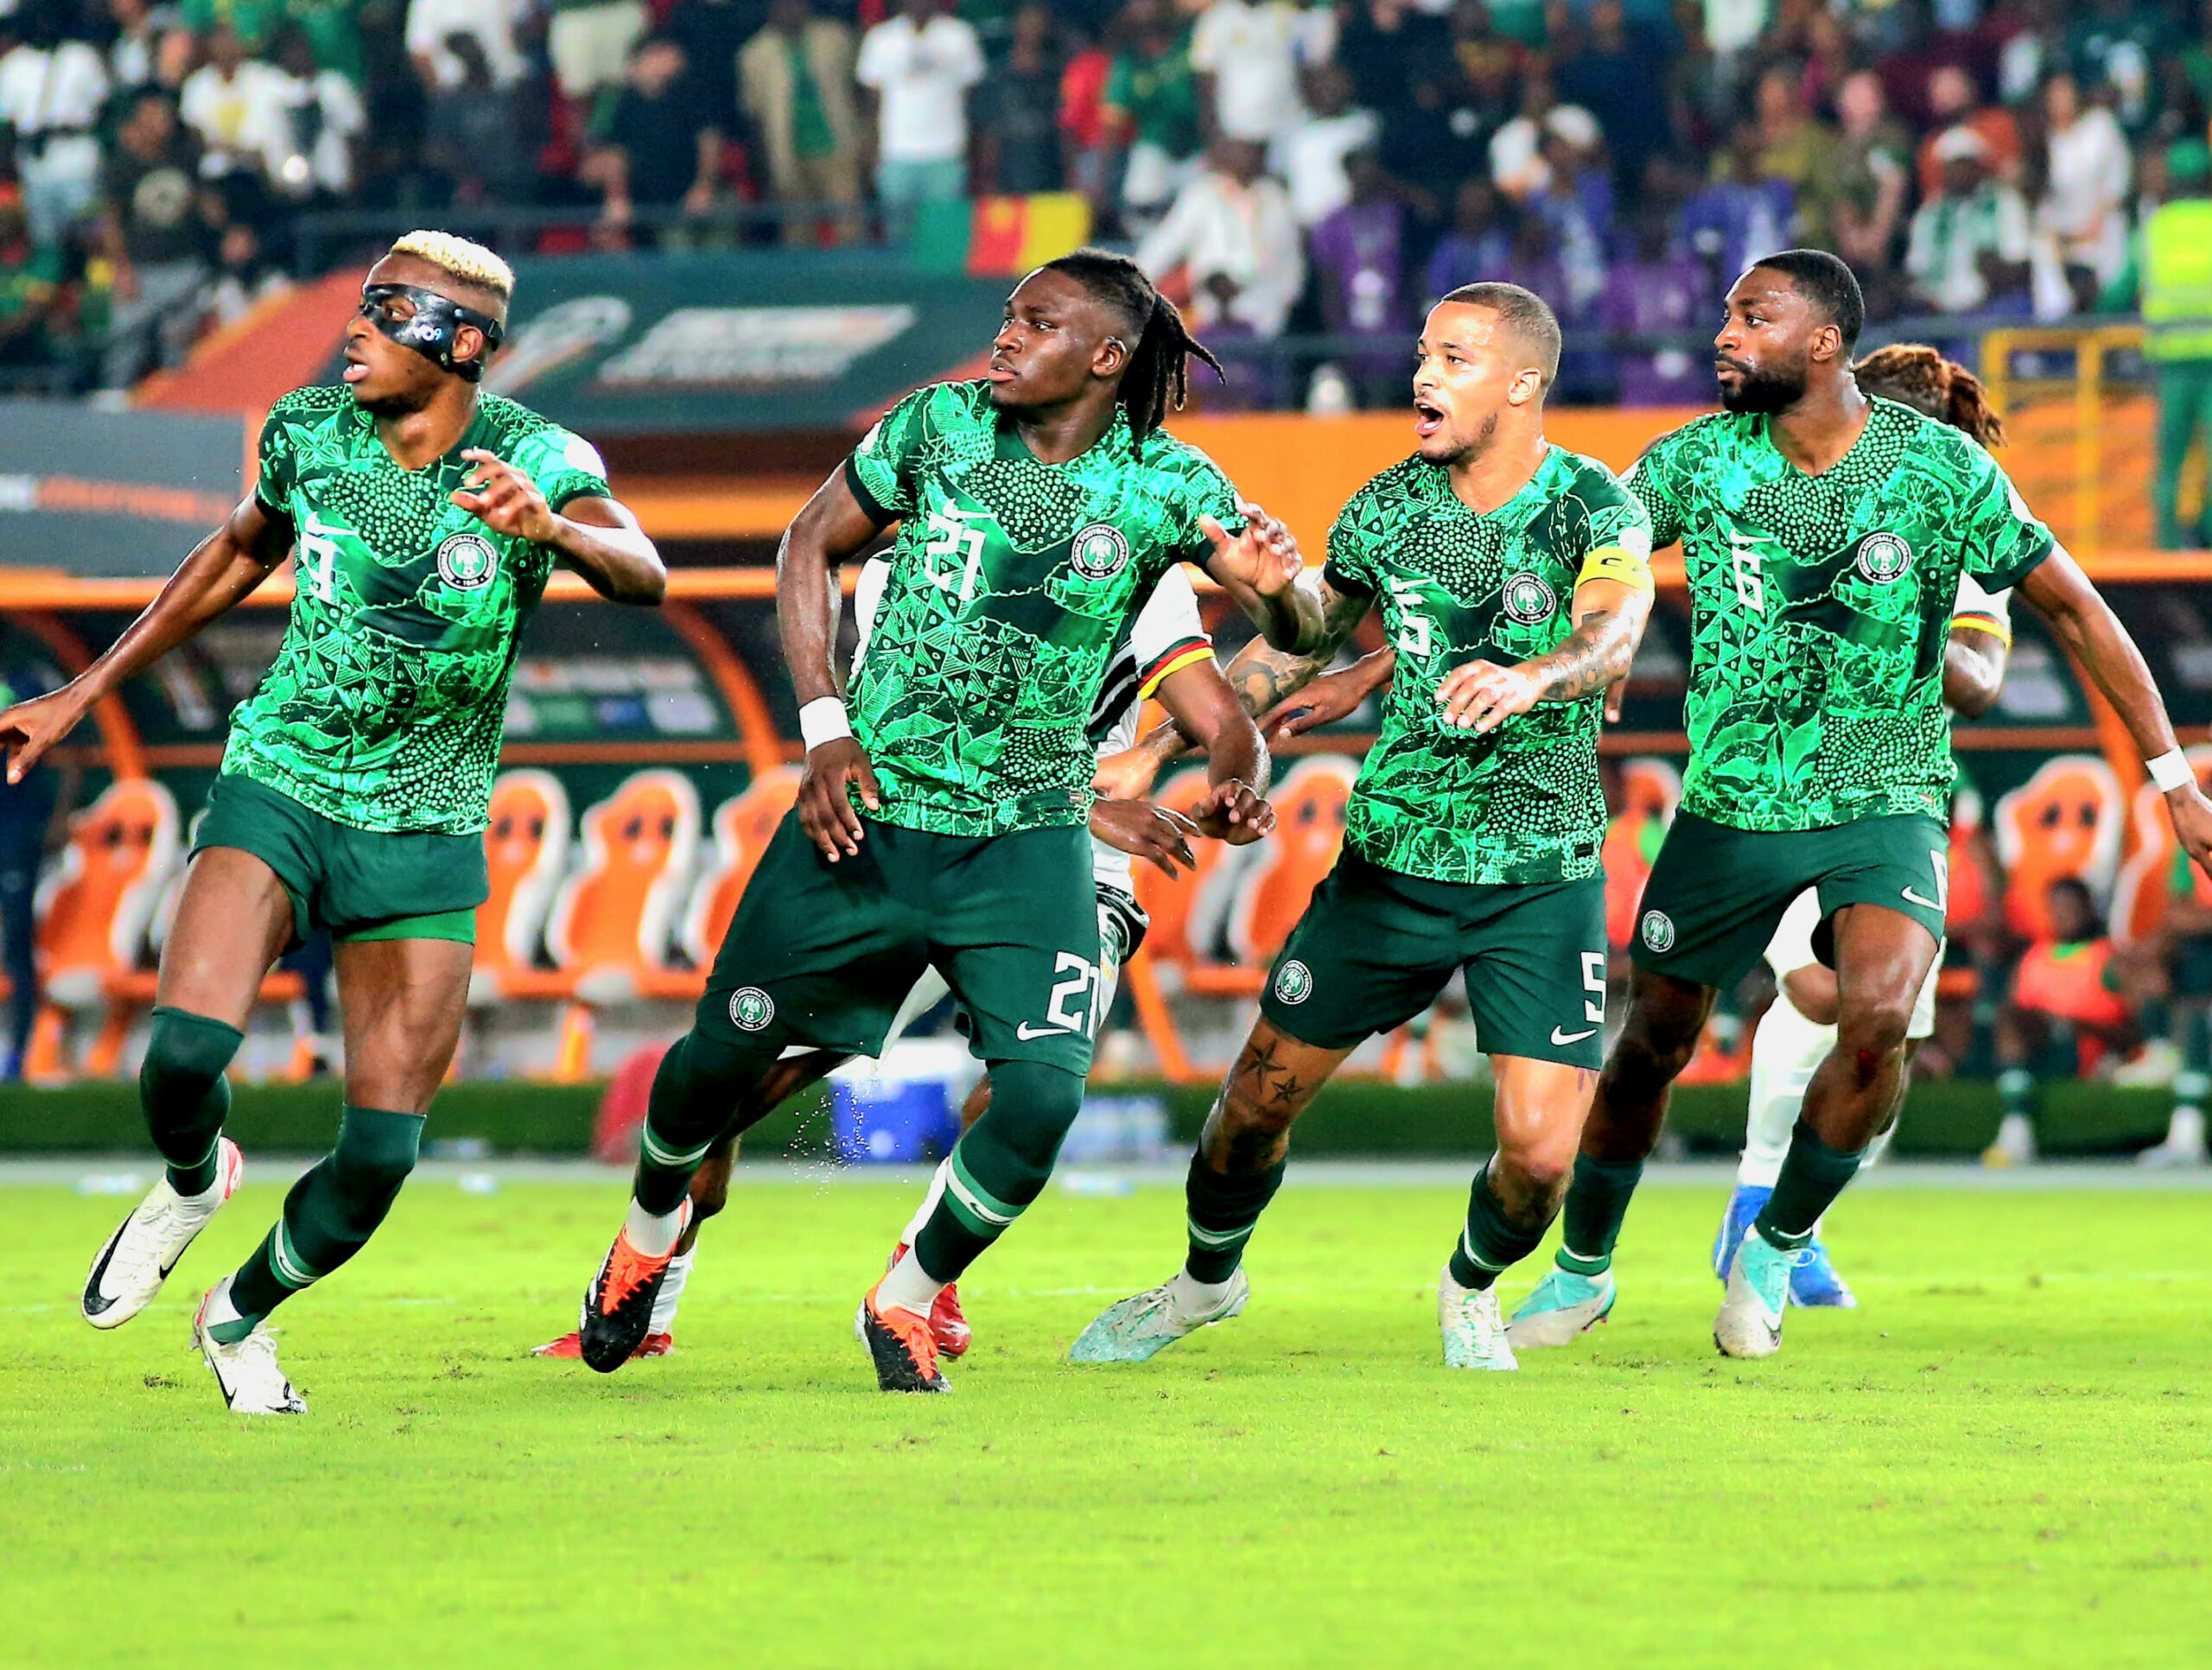 AFCON 2023: Super Eagles clear favorites in highly anticipated clash with South Africa